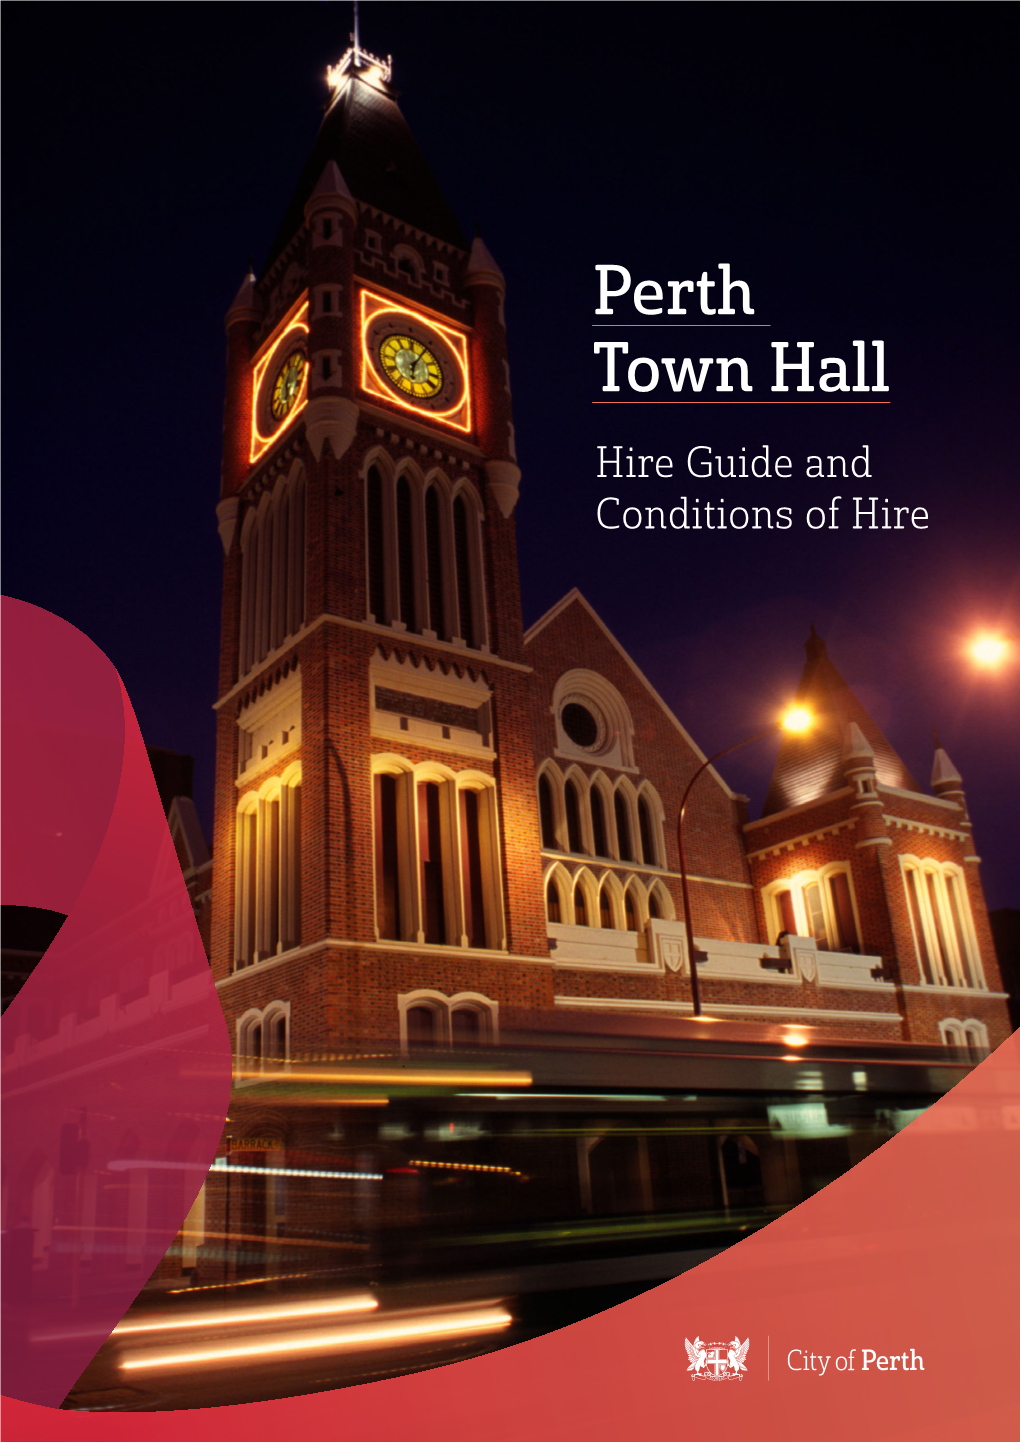 Perth Town Hall Hire Guide and Conditions of Hire Contents